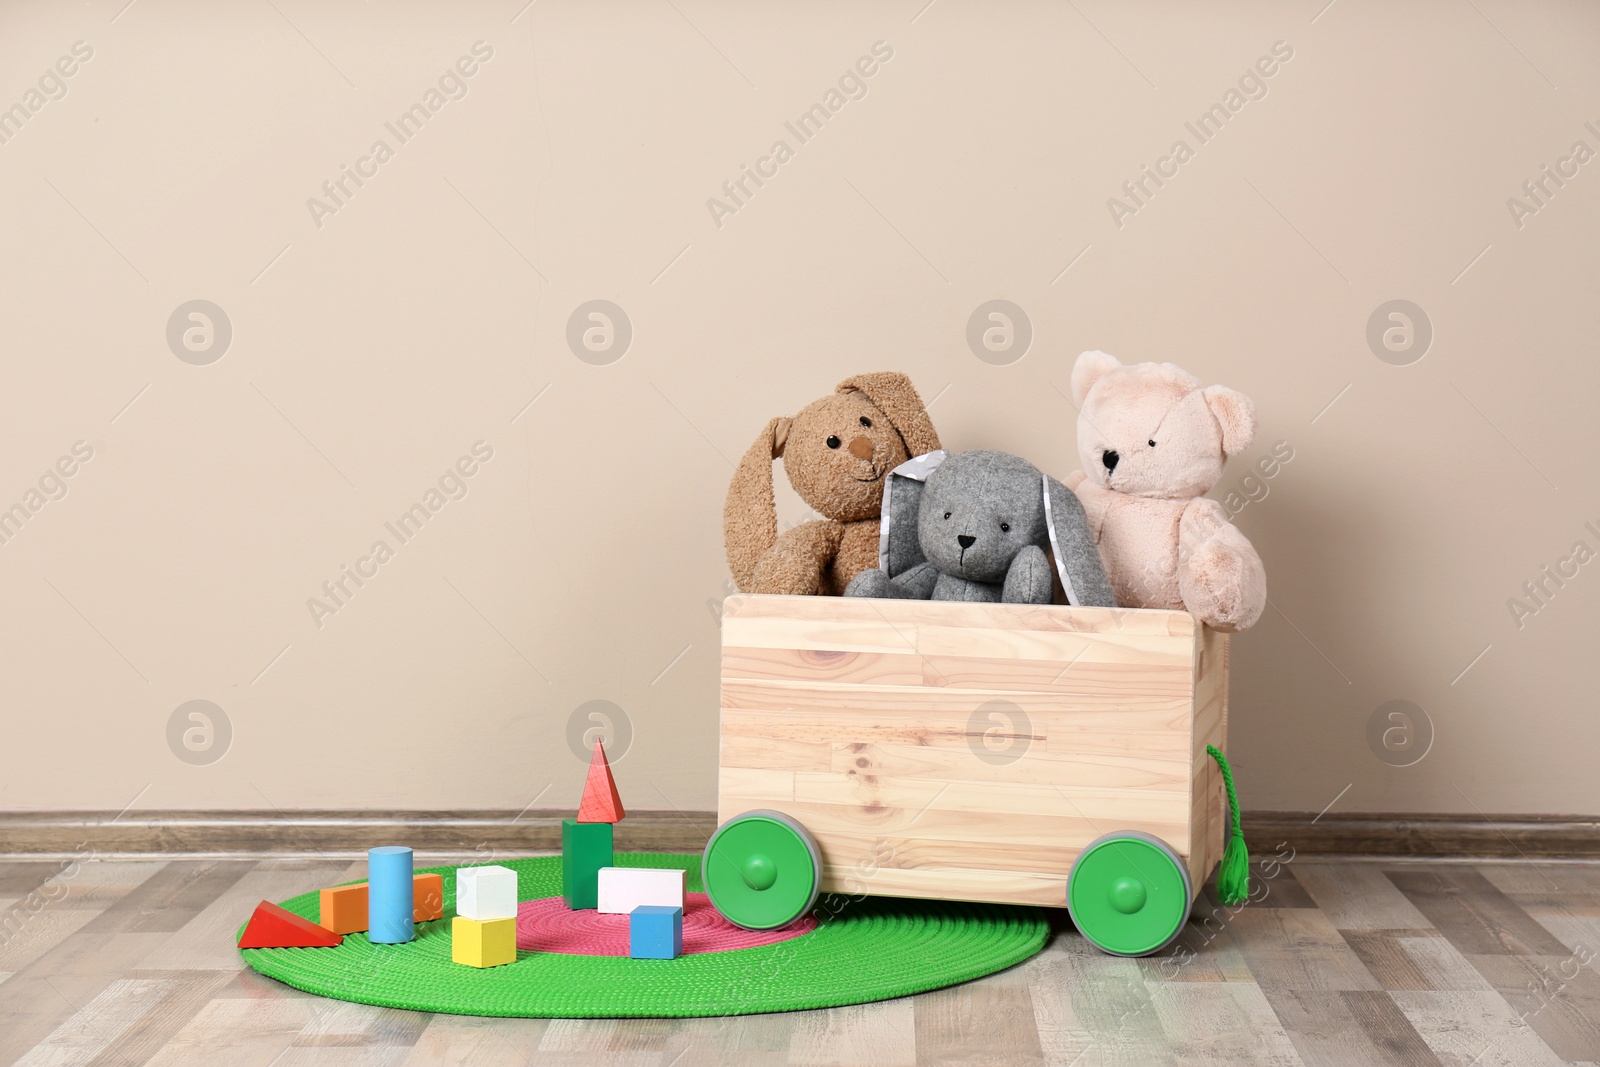 Photo of Wooden cart with stuffed toys and constructor on floor against light wall. Space for text